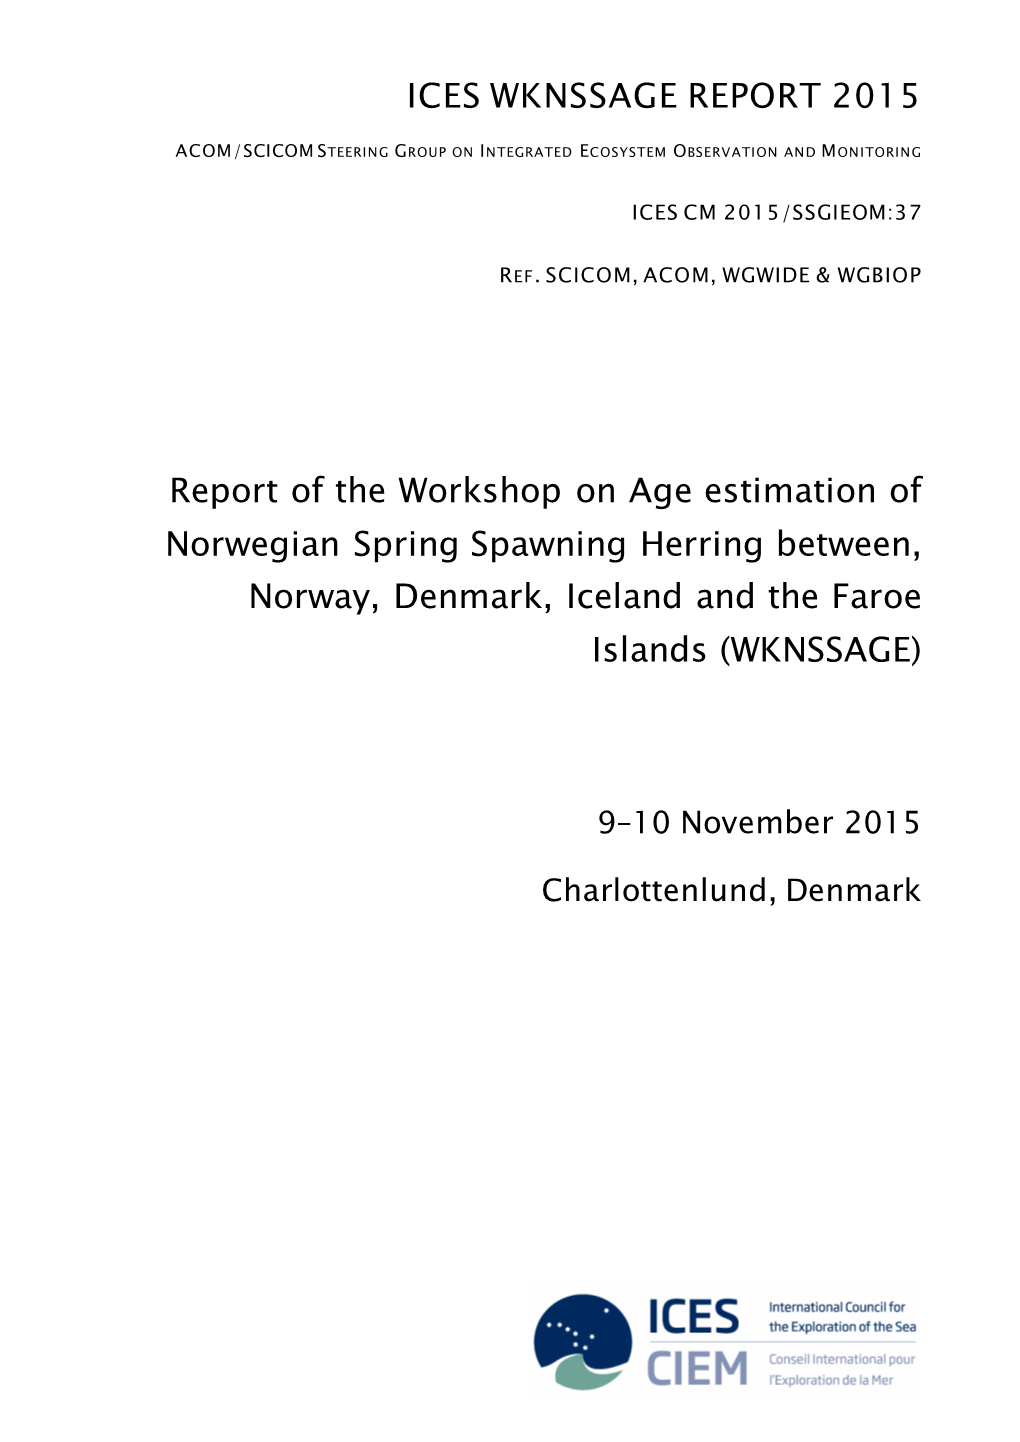 Report of the Workshop on Age Estimation of Norwegian Spring Spawning Herring Between, Norway, Denmark, Iceland and the Faroe Islands (WKNSSAGE)